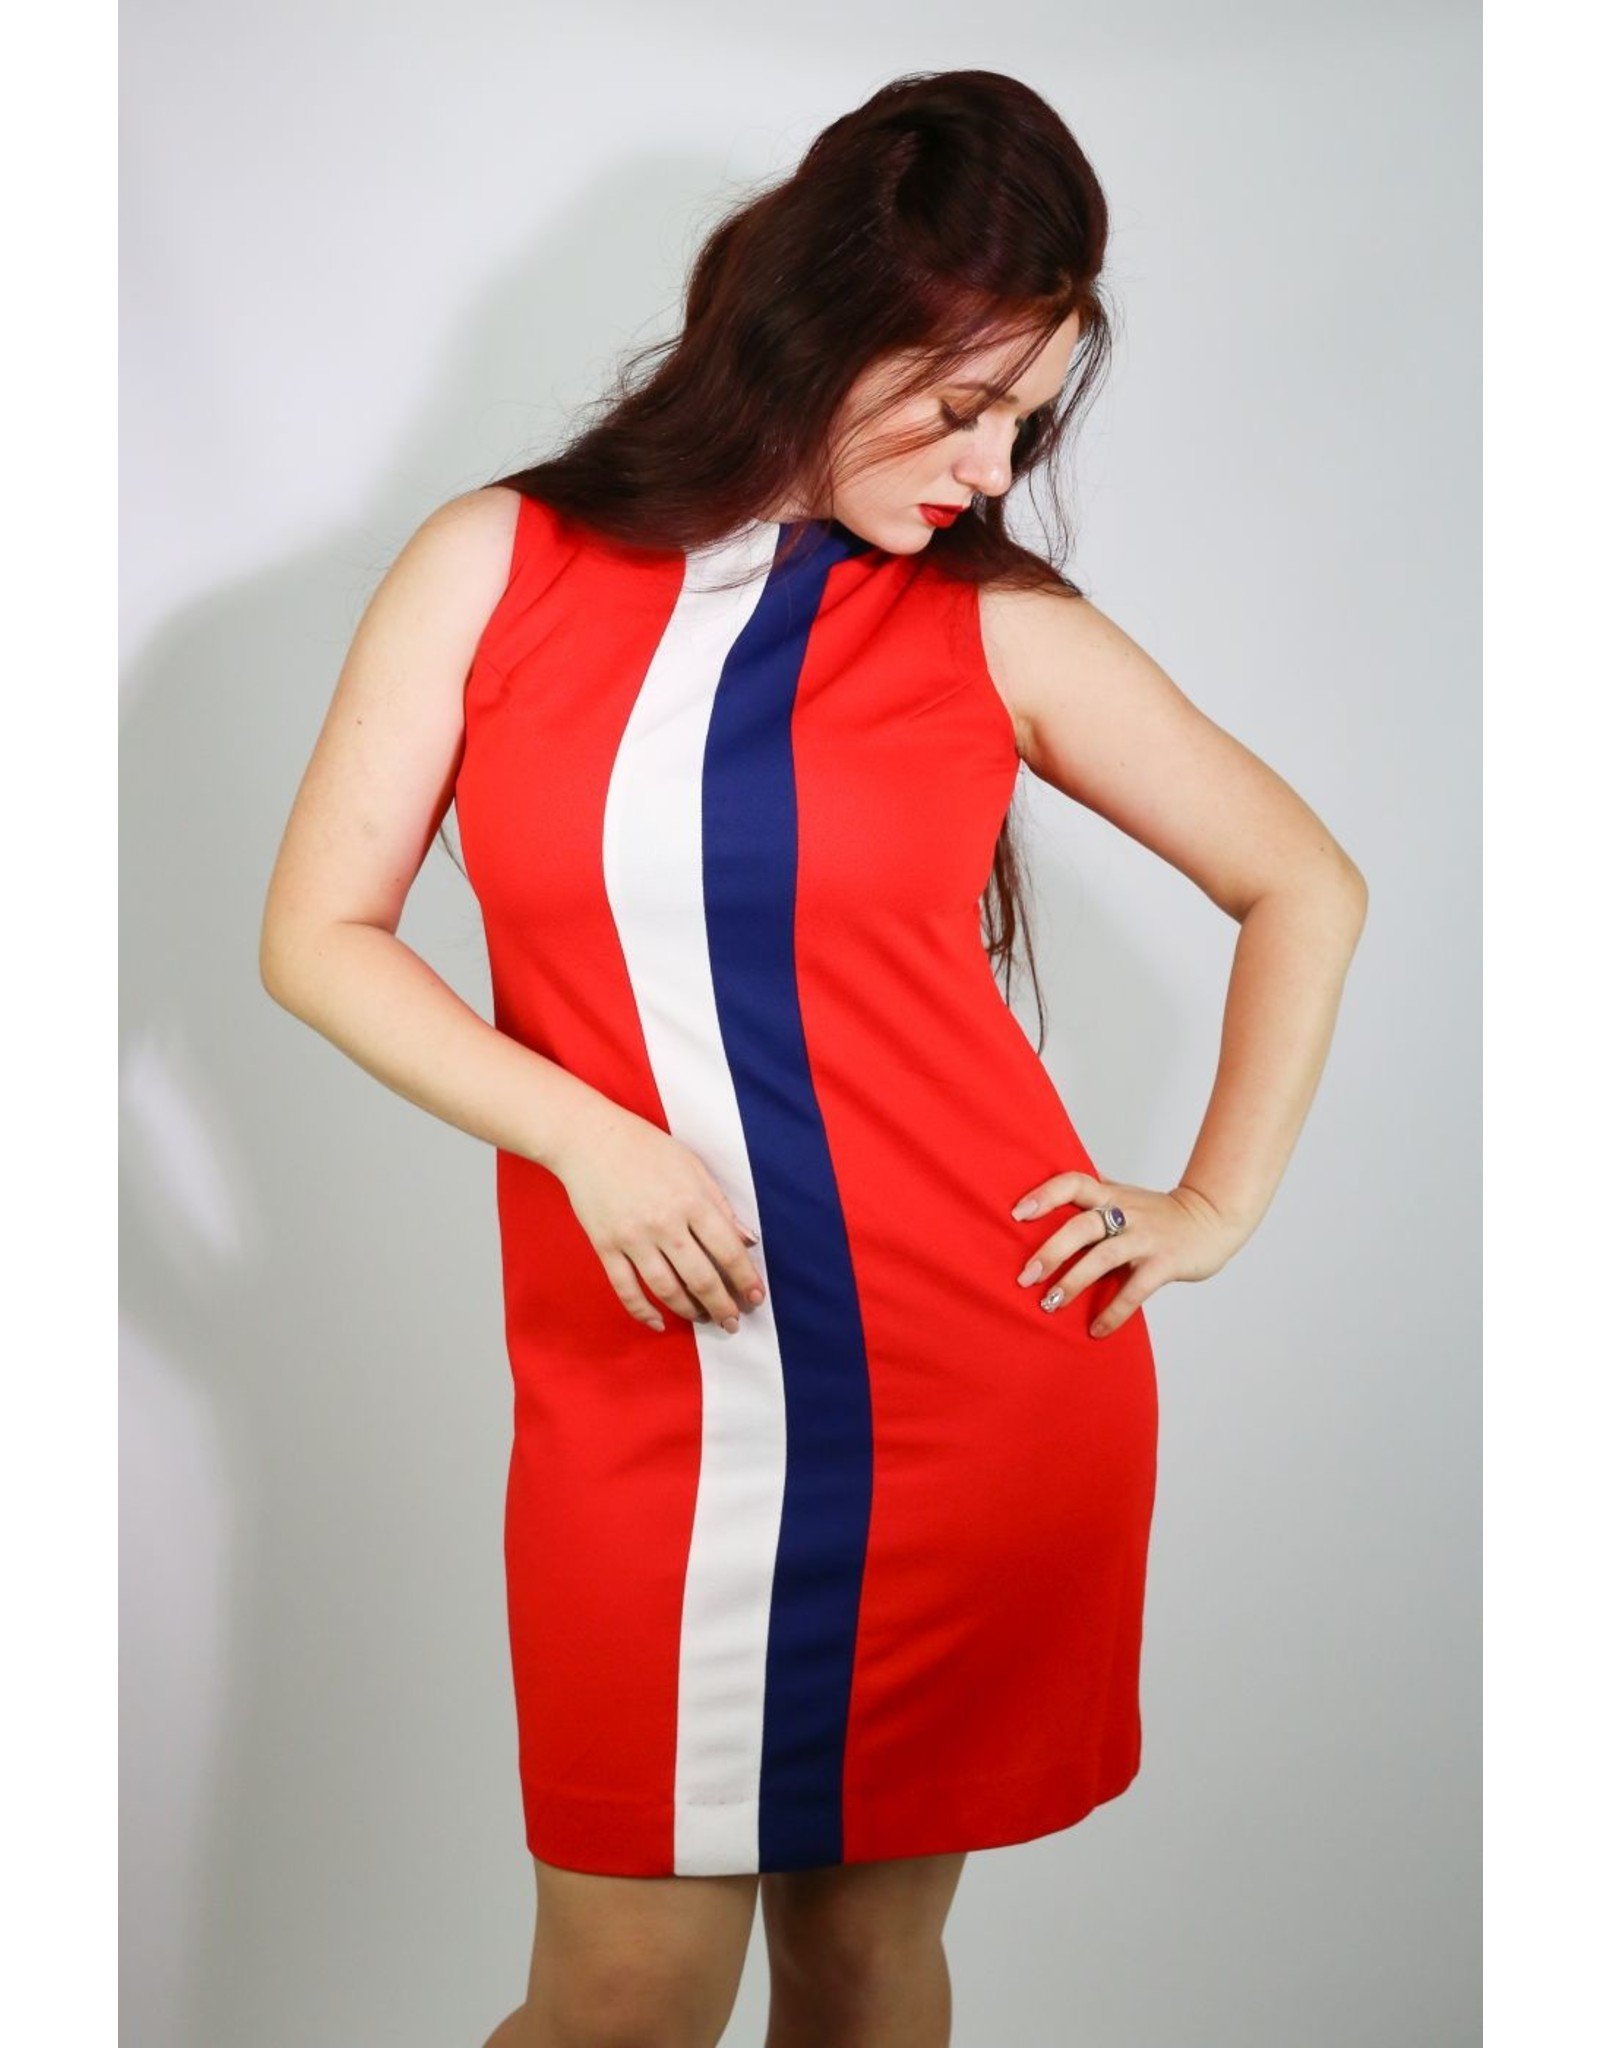 plus size red white and blue